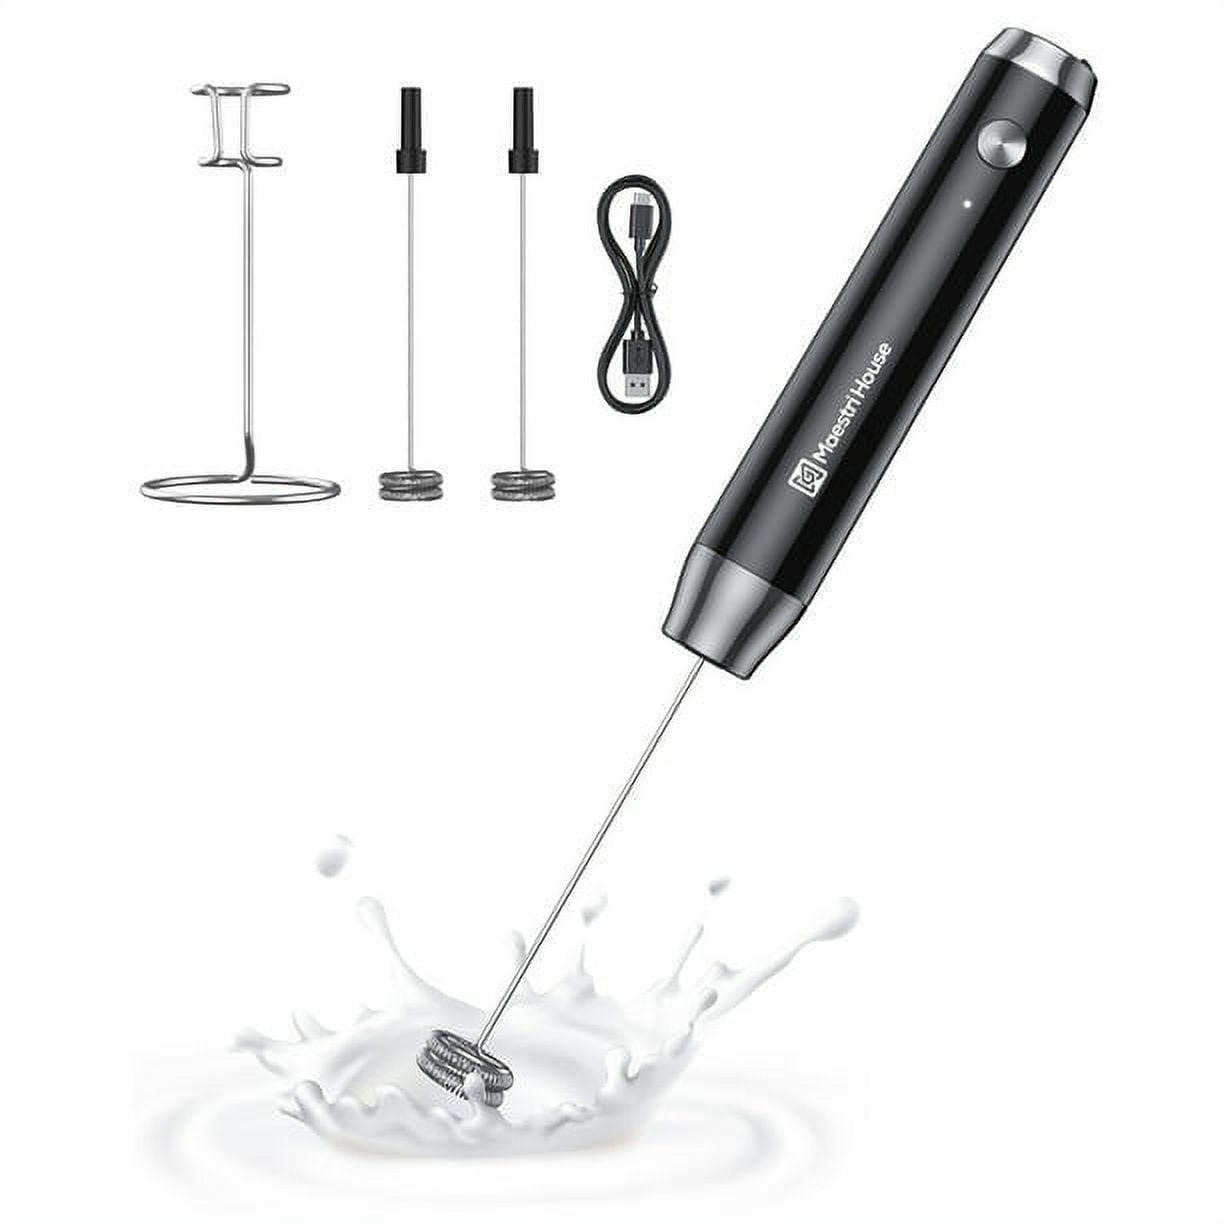 Electric Milk Frother Handheld, Maestri House USB Type-C Rechargeable Milk Foam Maker with 2pcs Whisks, Ipx7 Waterproof, Black